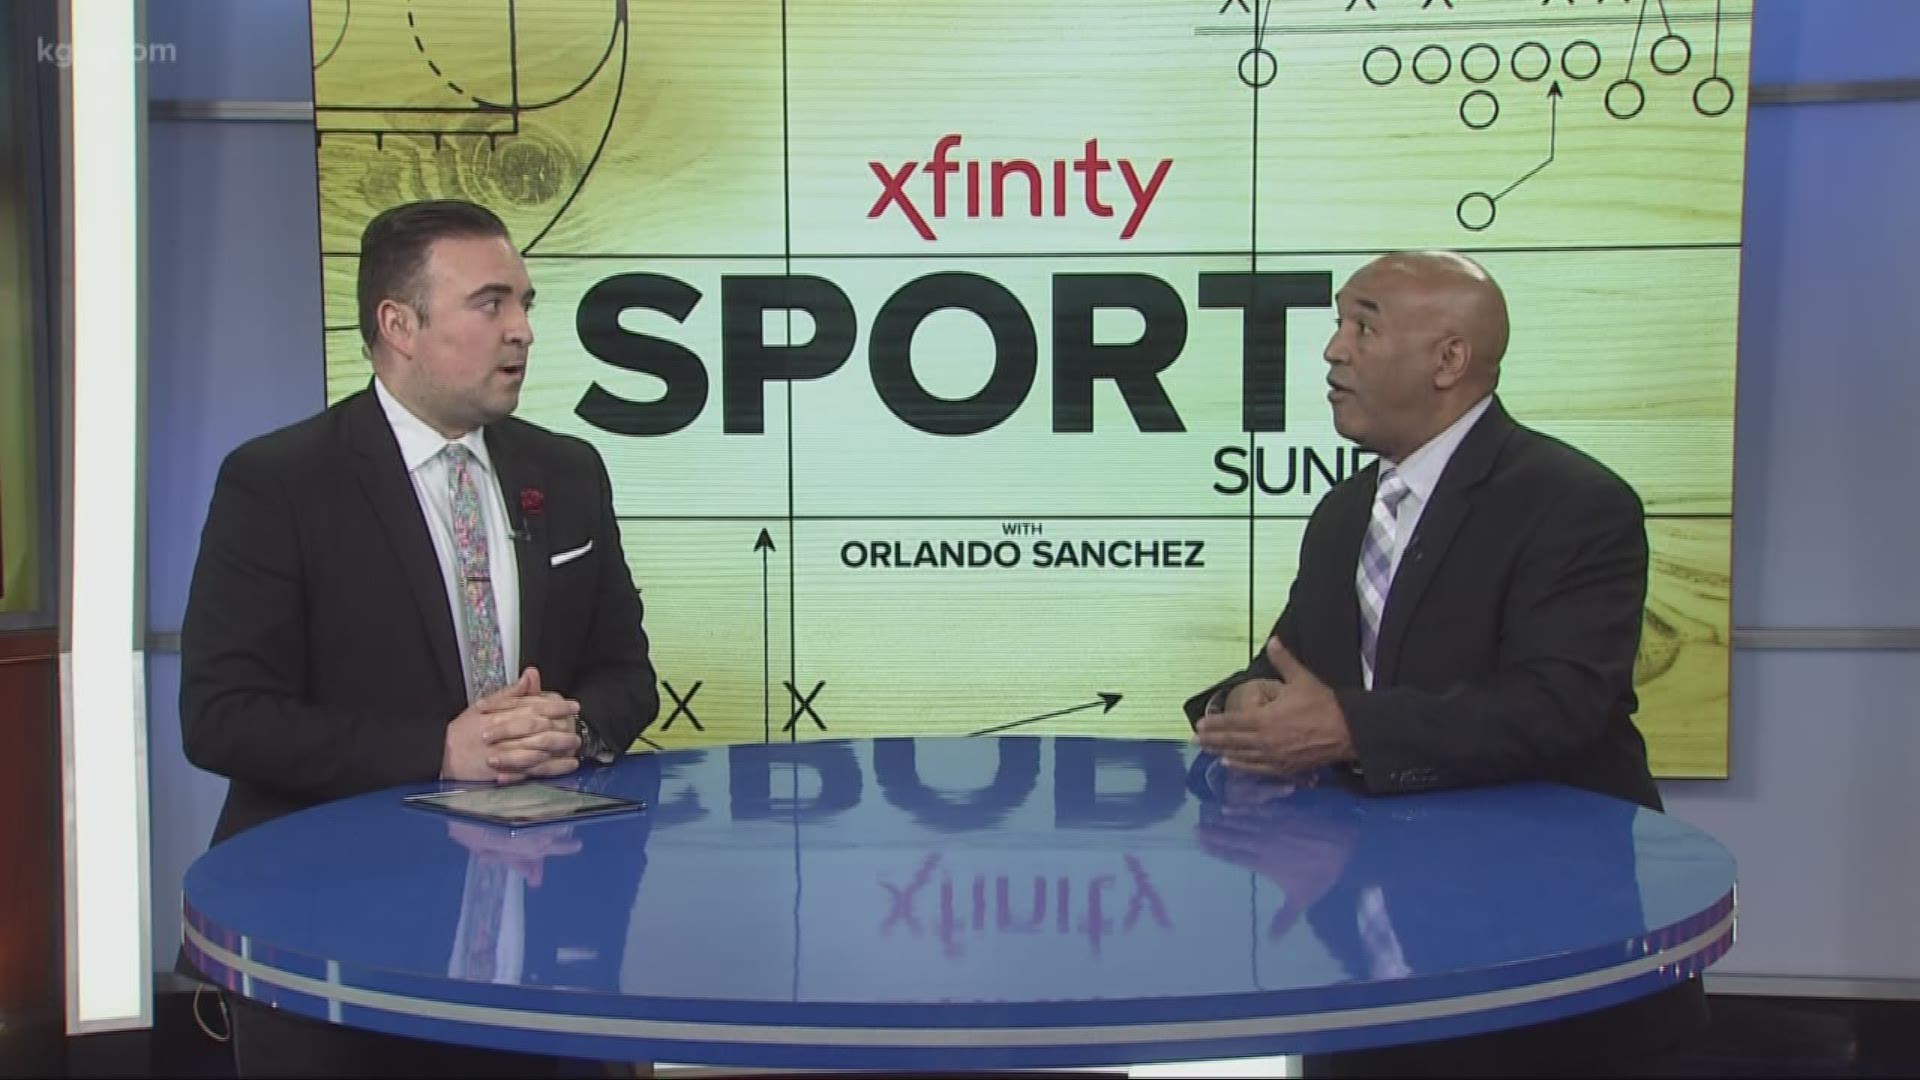 KGW's Orlando Sanchez and Art Edwards talk about the players who could help fill in at shooting guard for the Portland Trail Blazers while CJ McCollum recovers from a left knee strain.